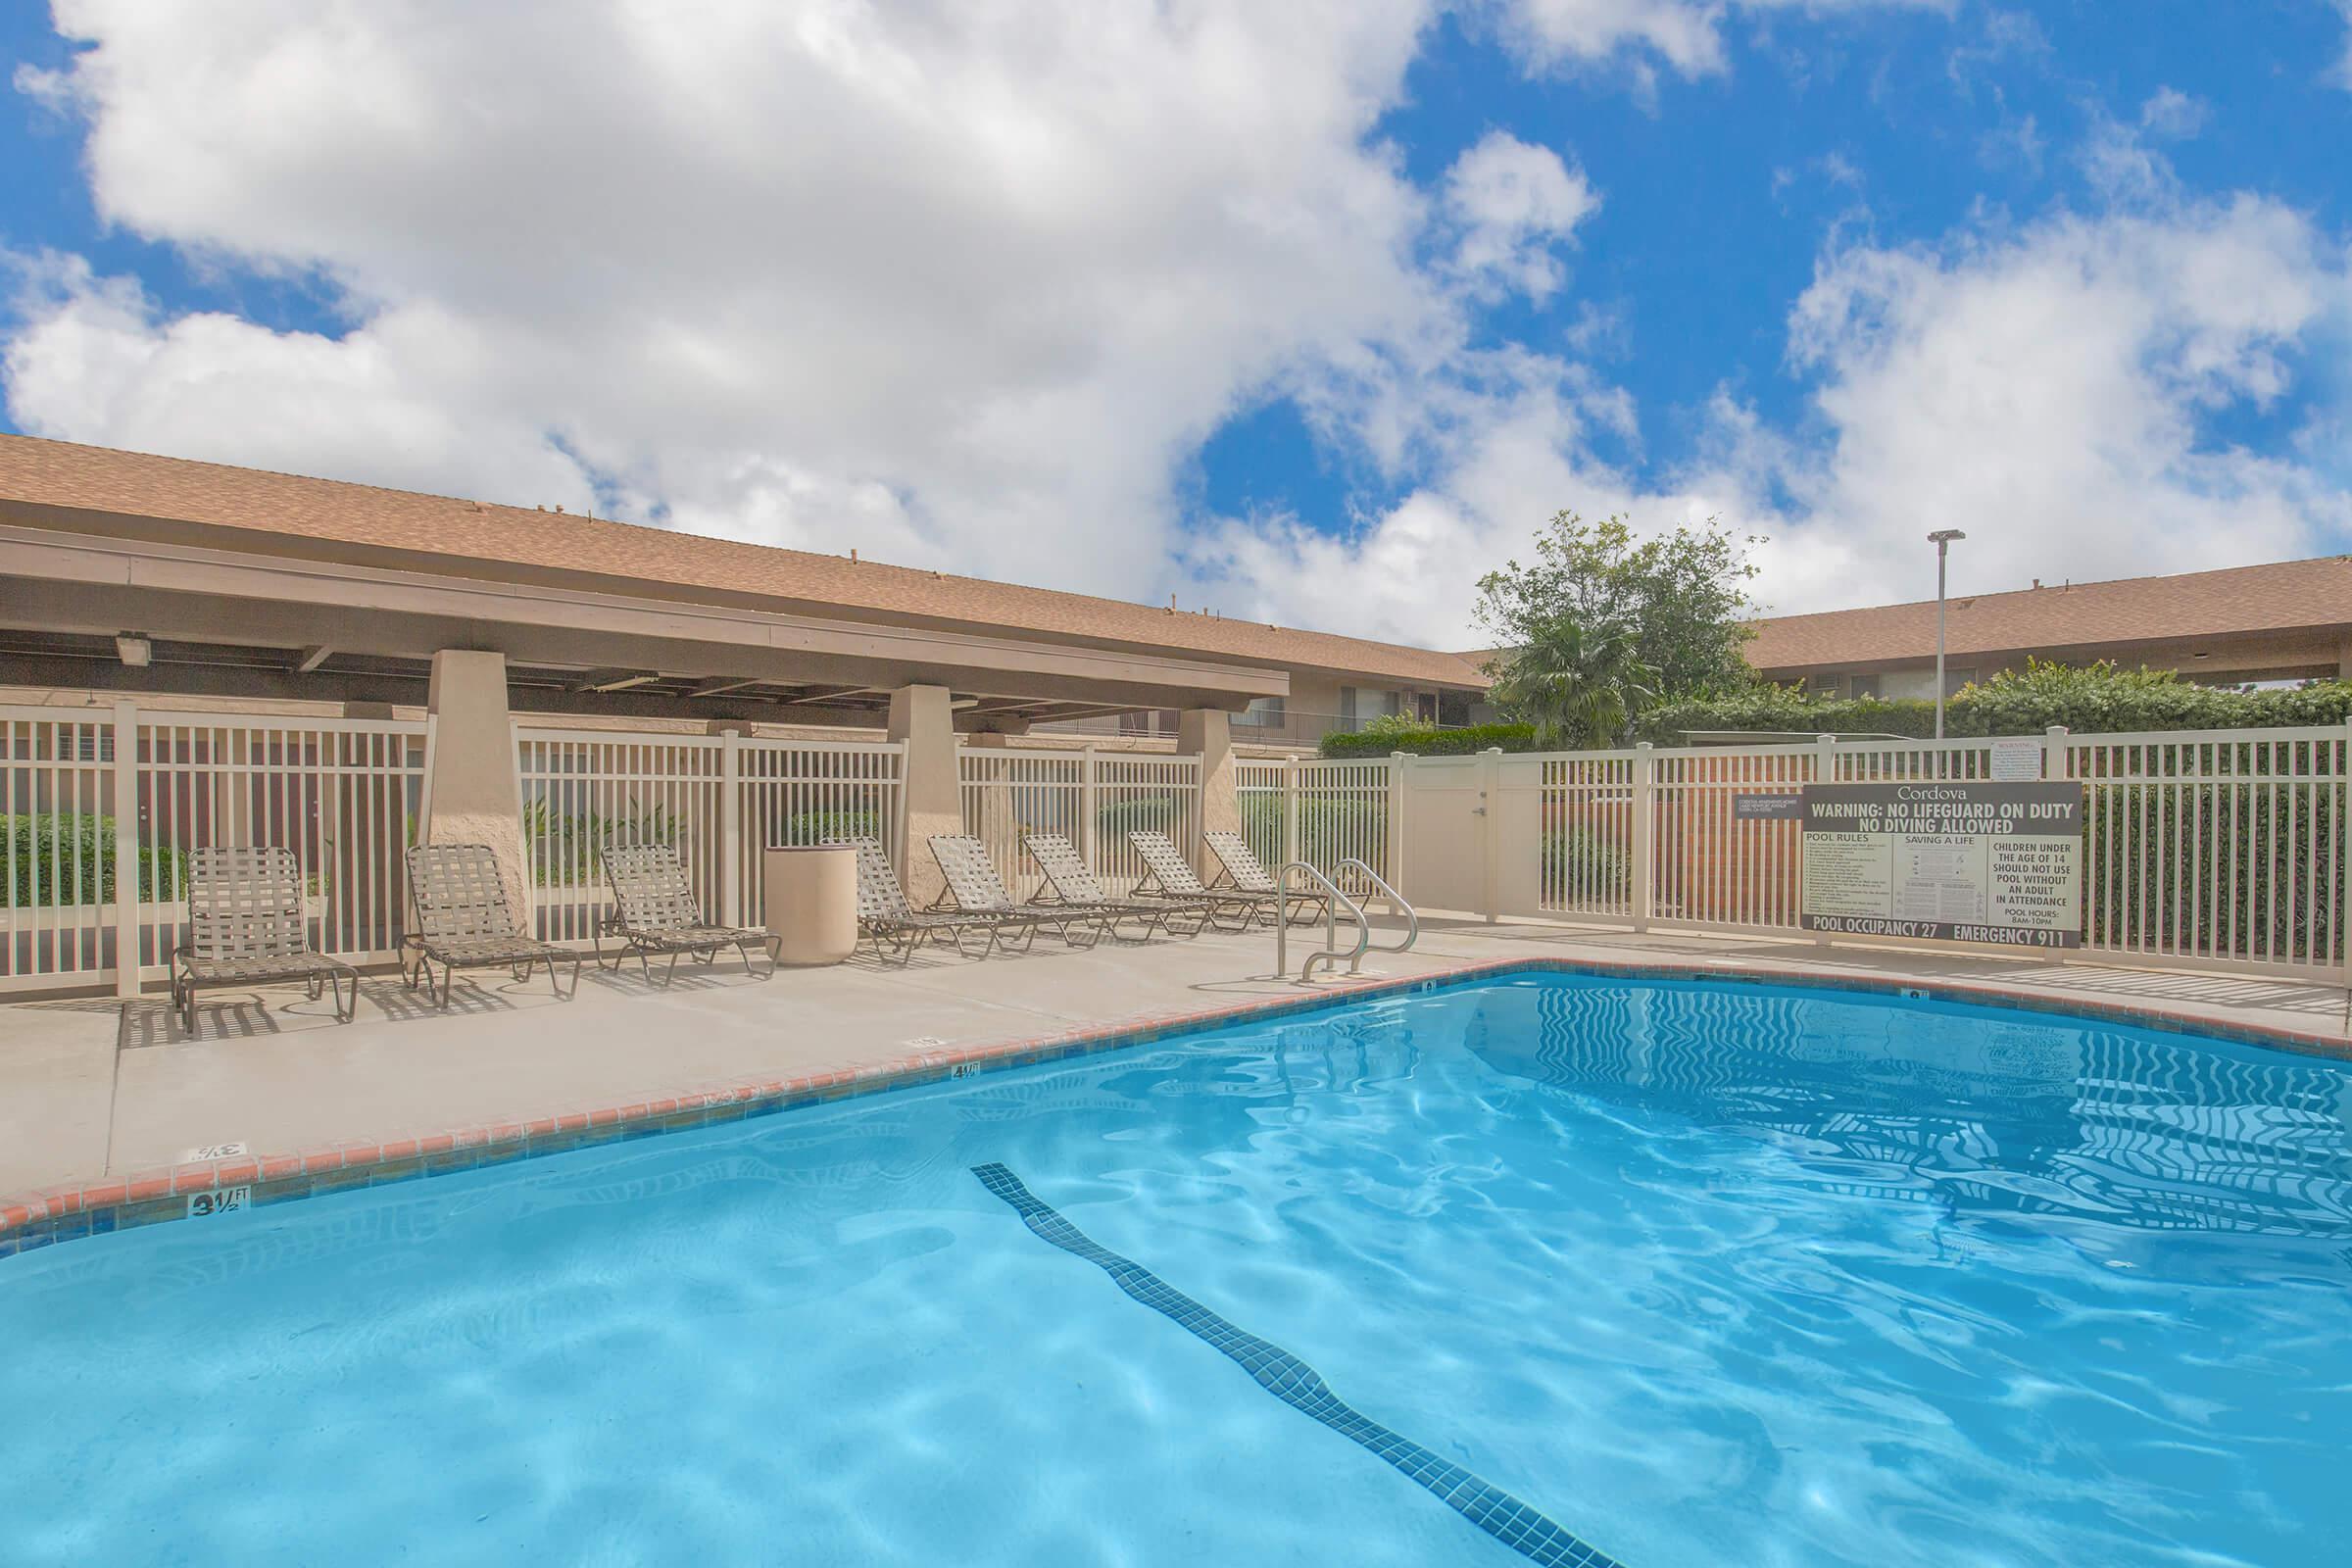 Castilian and Cordova Apartment Homes community pool with chairs